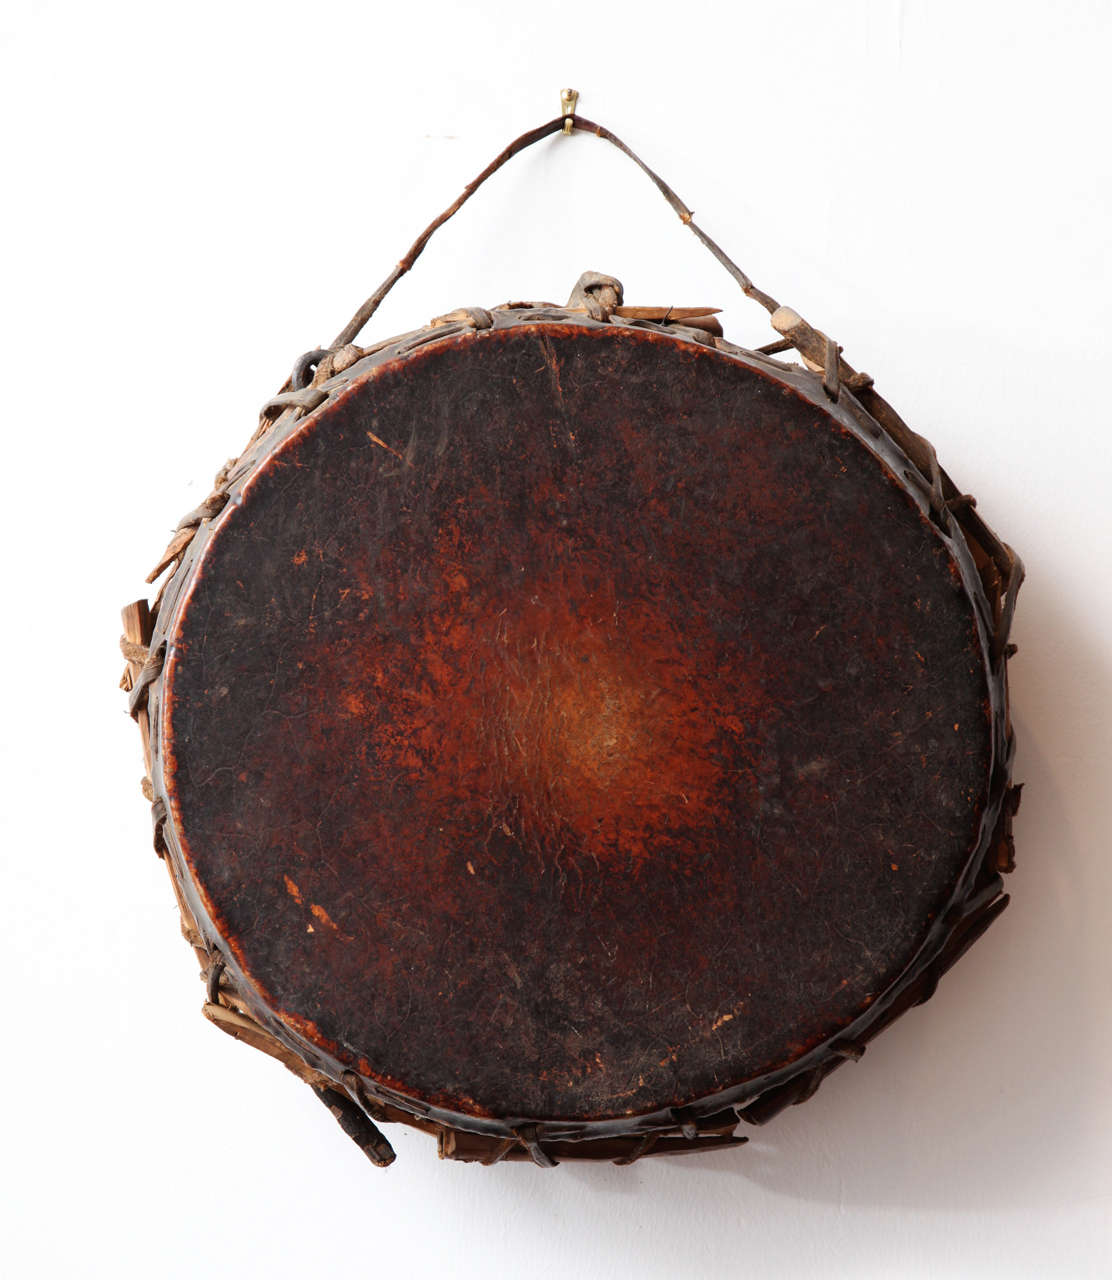 Folk art tribal drum with original undamaged cow hide.  Still has great, original patina.
The drum still produces a loud beautiful tone when thumped with a finger.

collectors of tribal art should not miss the rustic and beautiful object.